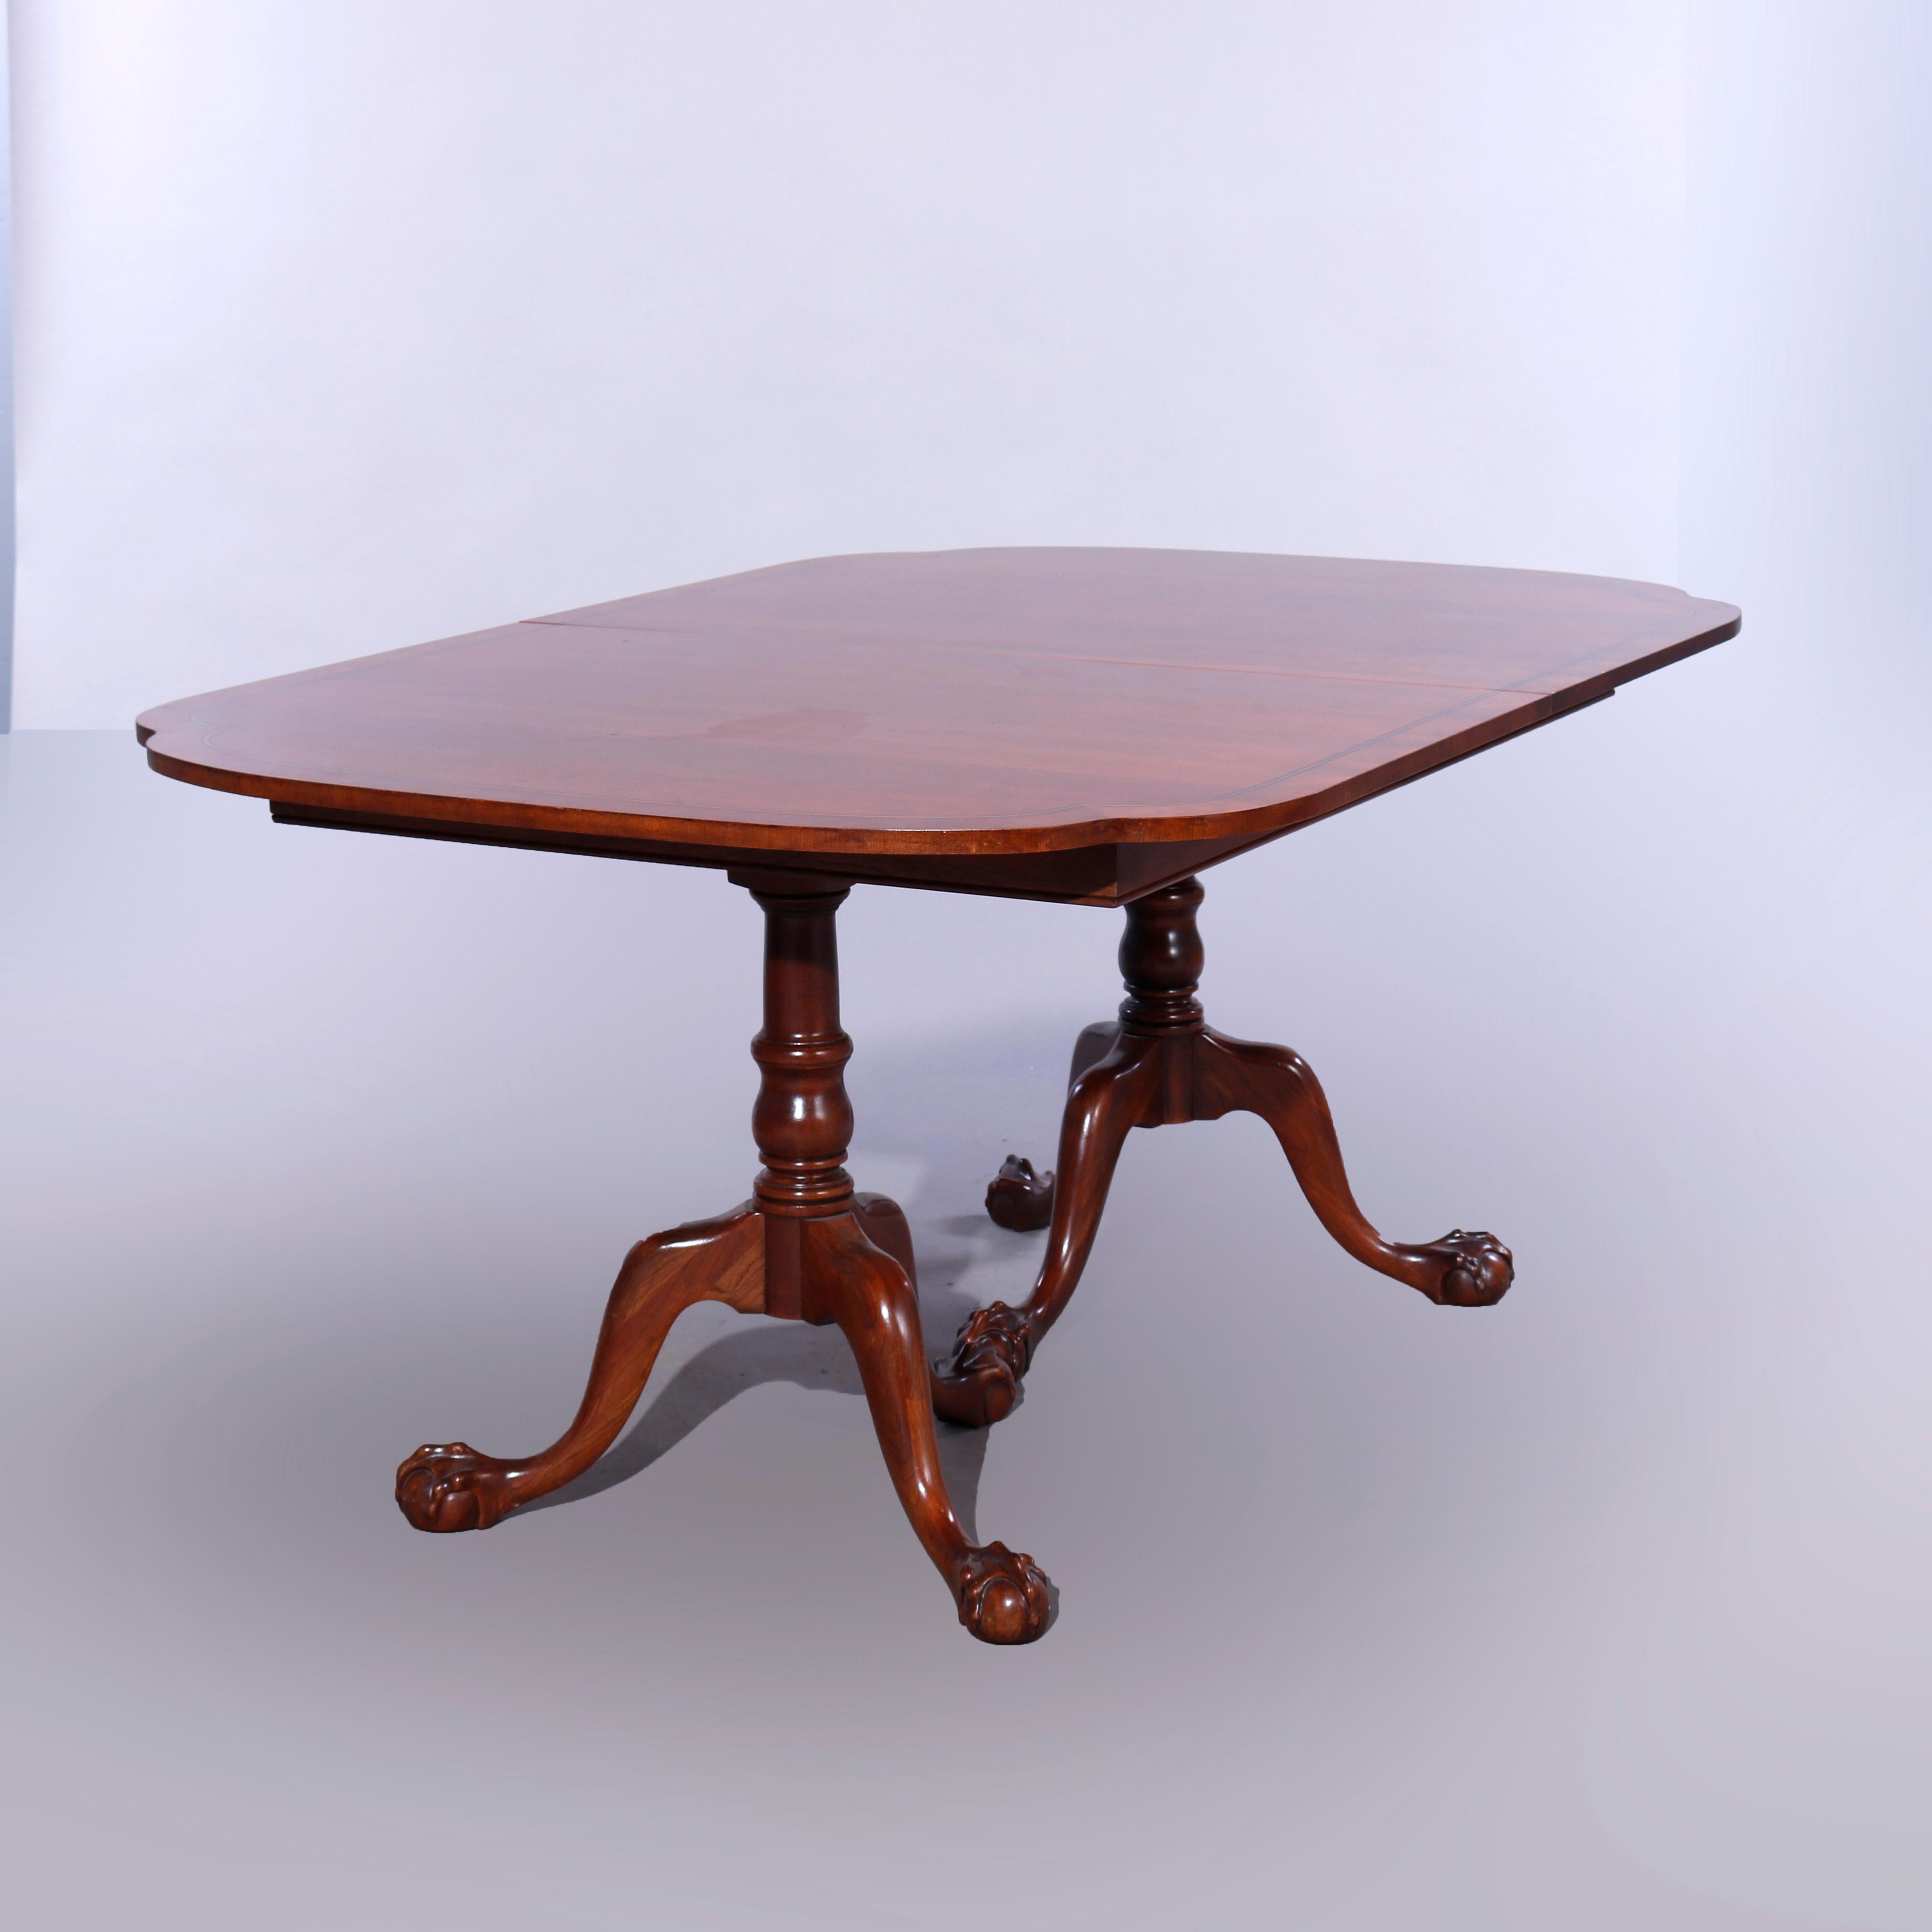 American Antique Mahogany Chippendale Style Claw Foot Dining Table & Three Leaves c1930